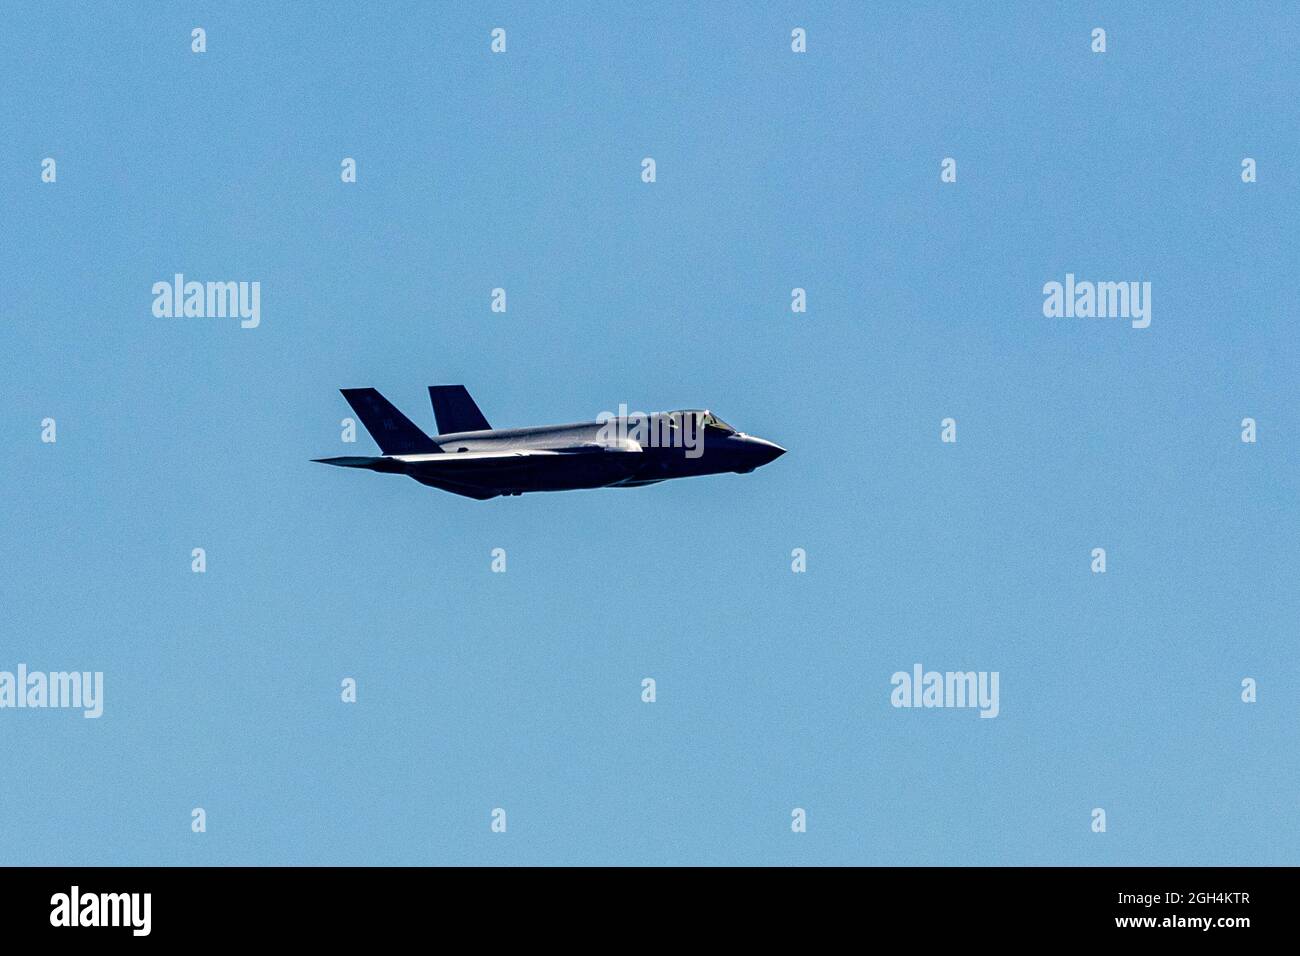 The F-35A Lightning II of United States Air Force (USAF) flies during the Canadian International Air Show (CIAS) in Toronto, Canada Stock Photo